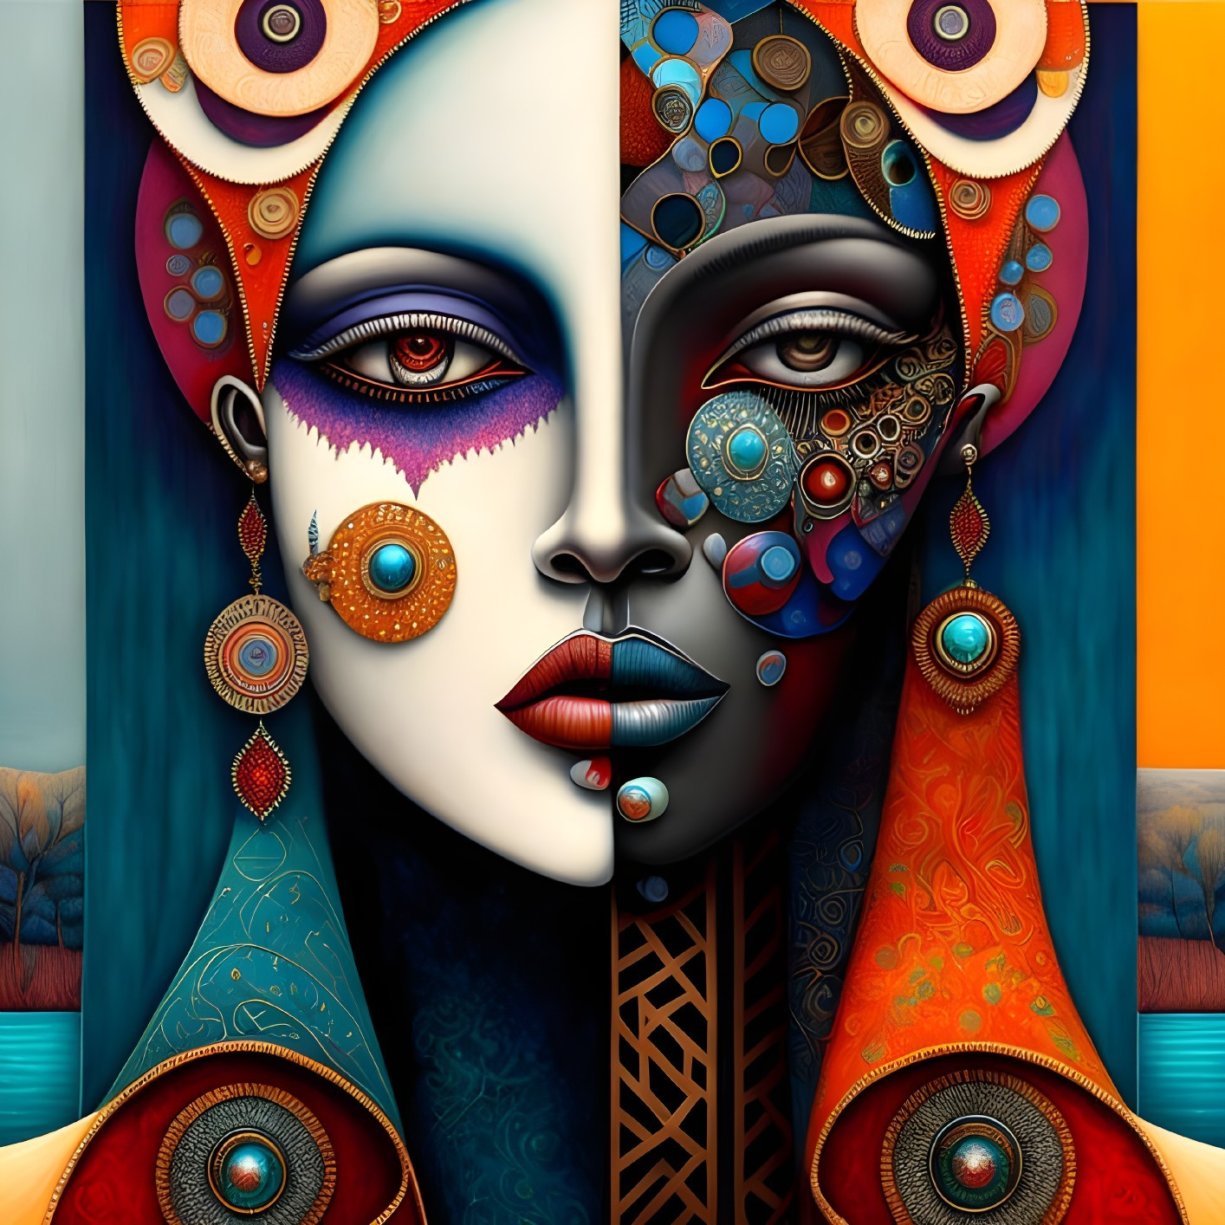 Colorful symmetrical faces with intricate patterns and jewelry in digital art